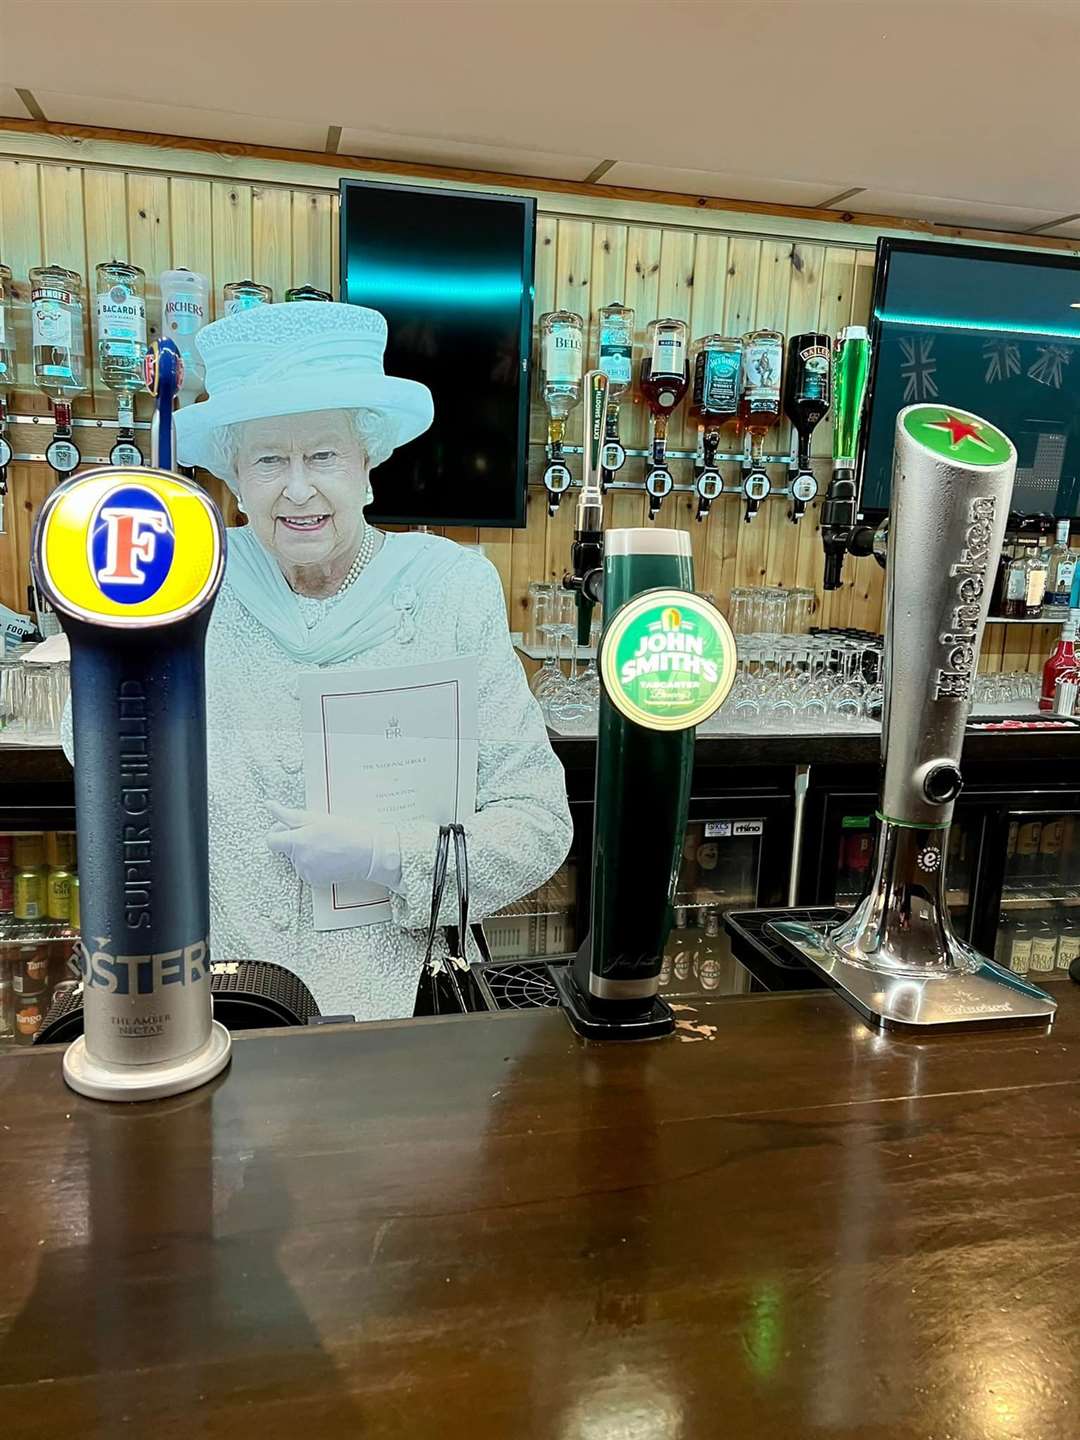 The Queen appears to have made an early appearance behind the bar at Priory Hill Holiday Park in Wing Road, Leysdown, in readiness for her Platinum Jubilee